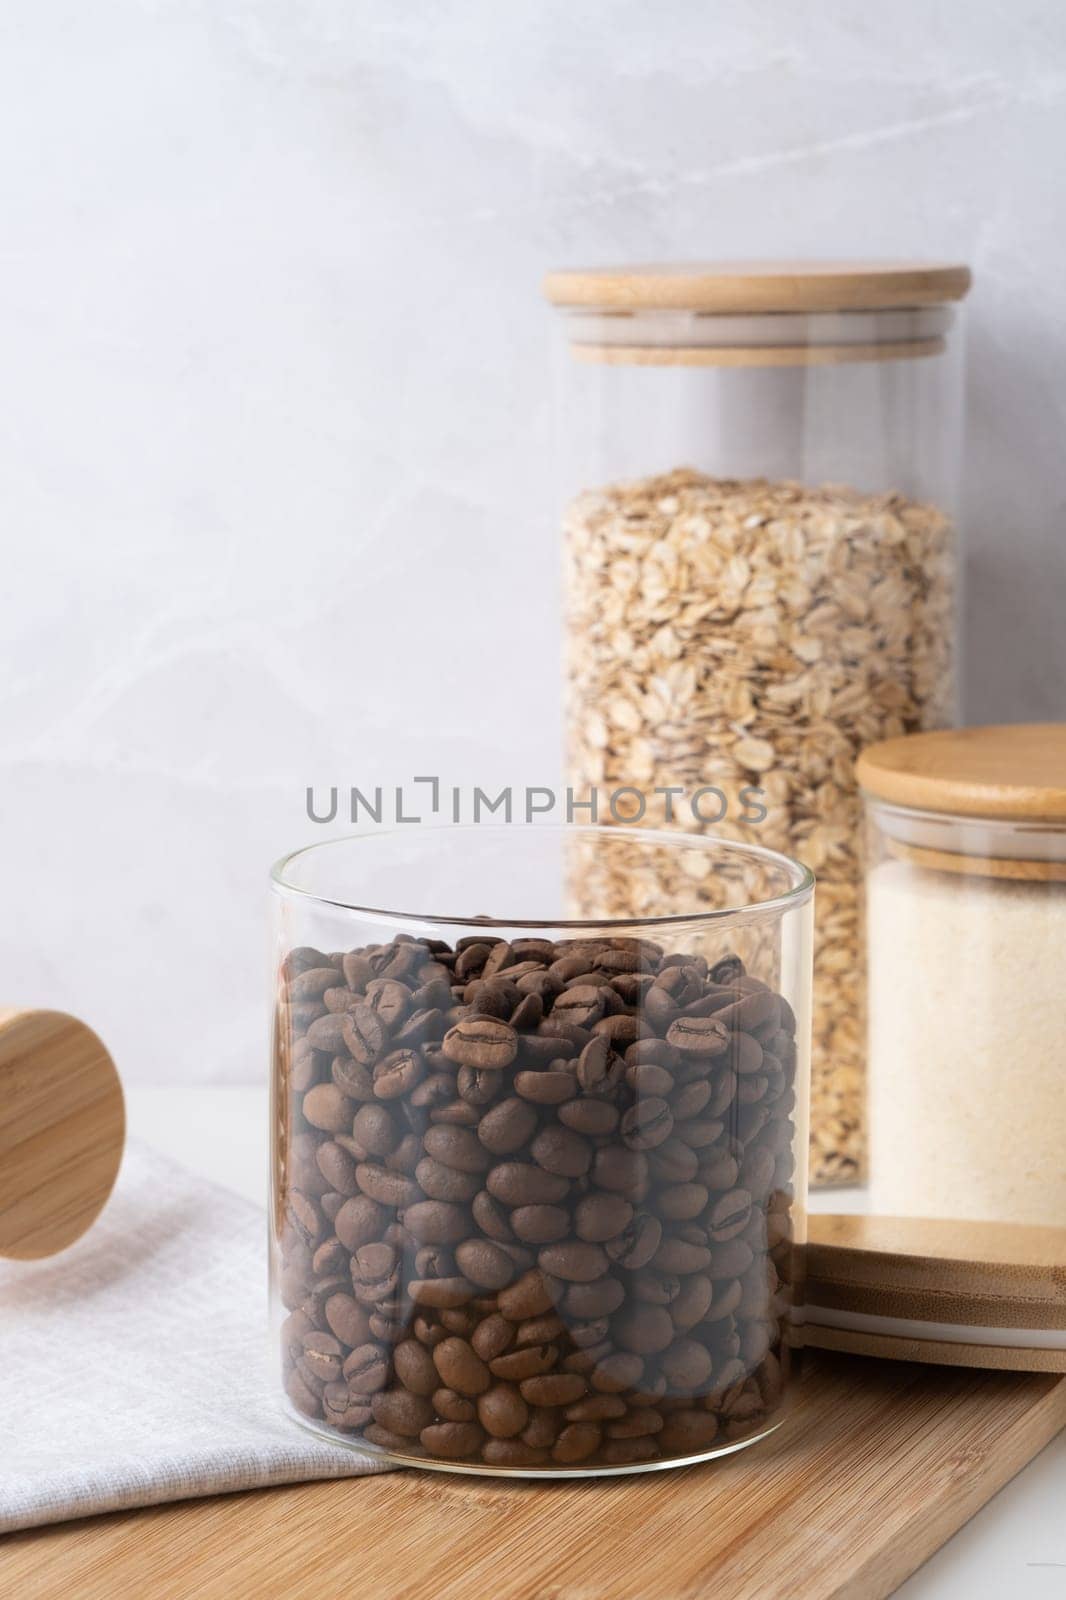 Reusing Glass Jars To Store Dried Food Living Sustainable Lifestyle At Home. coffee beans in glass jar by Desperada